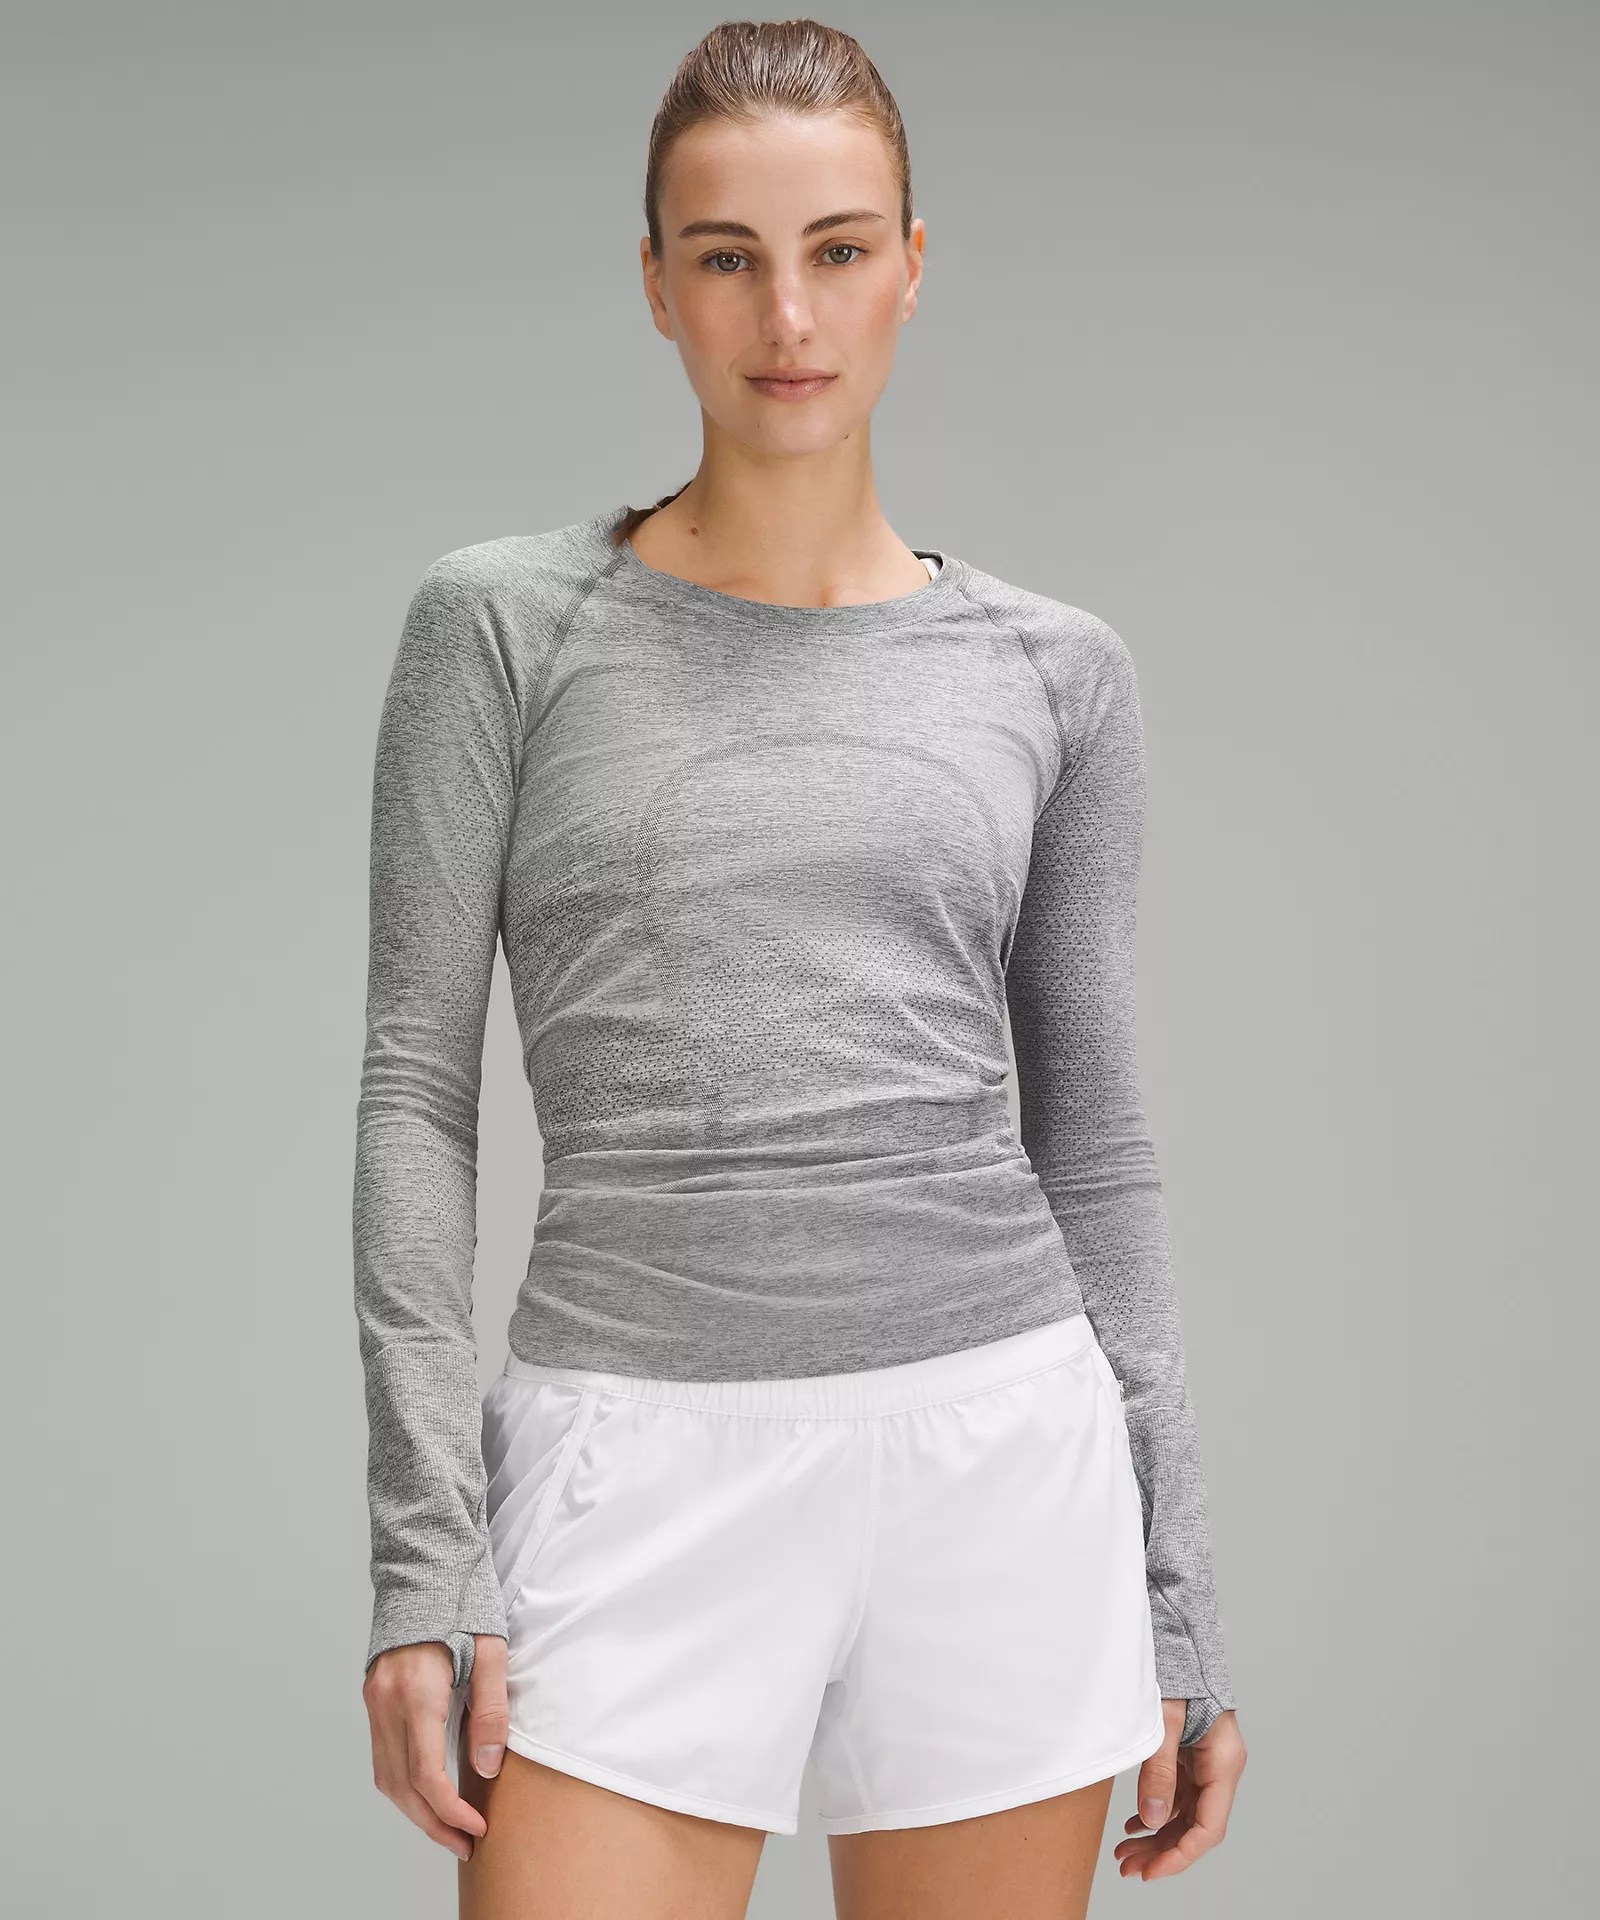 swiftly long sleeve shirt, one of the best lululemon products